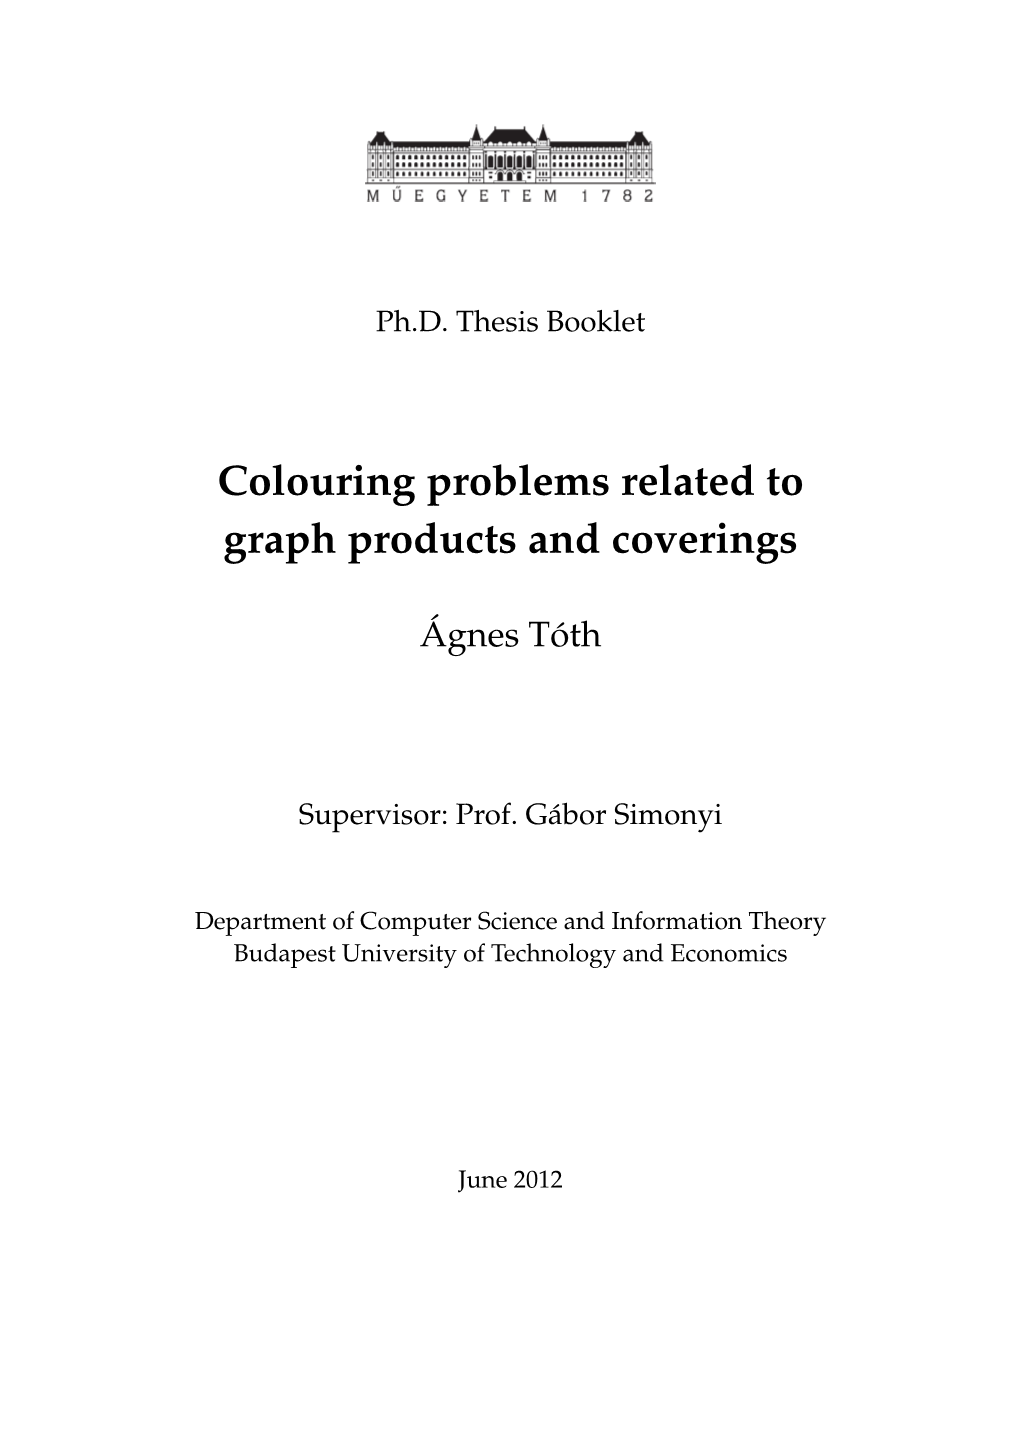 Colouring Problems Related to Graph Products and Coverings